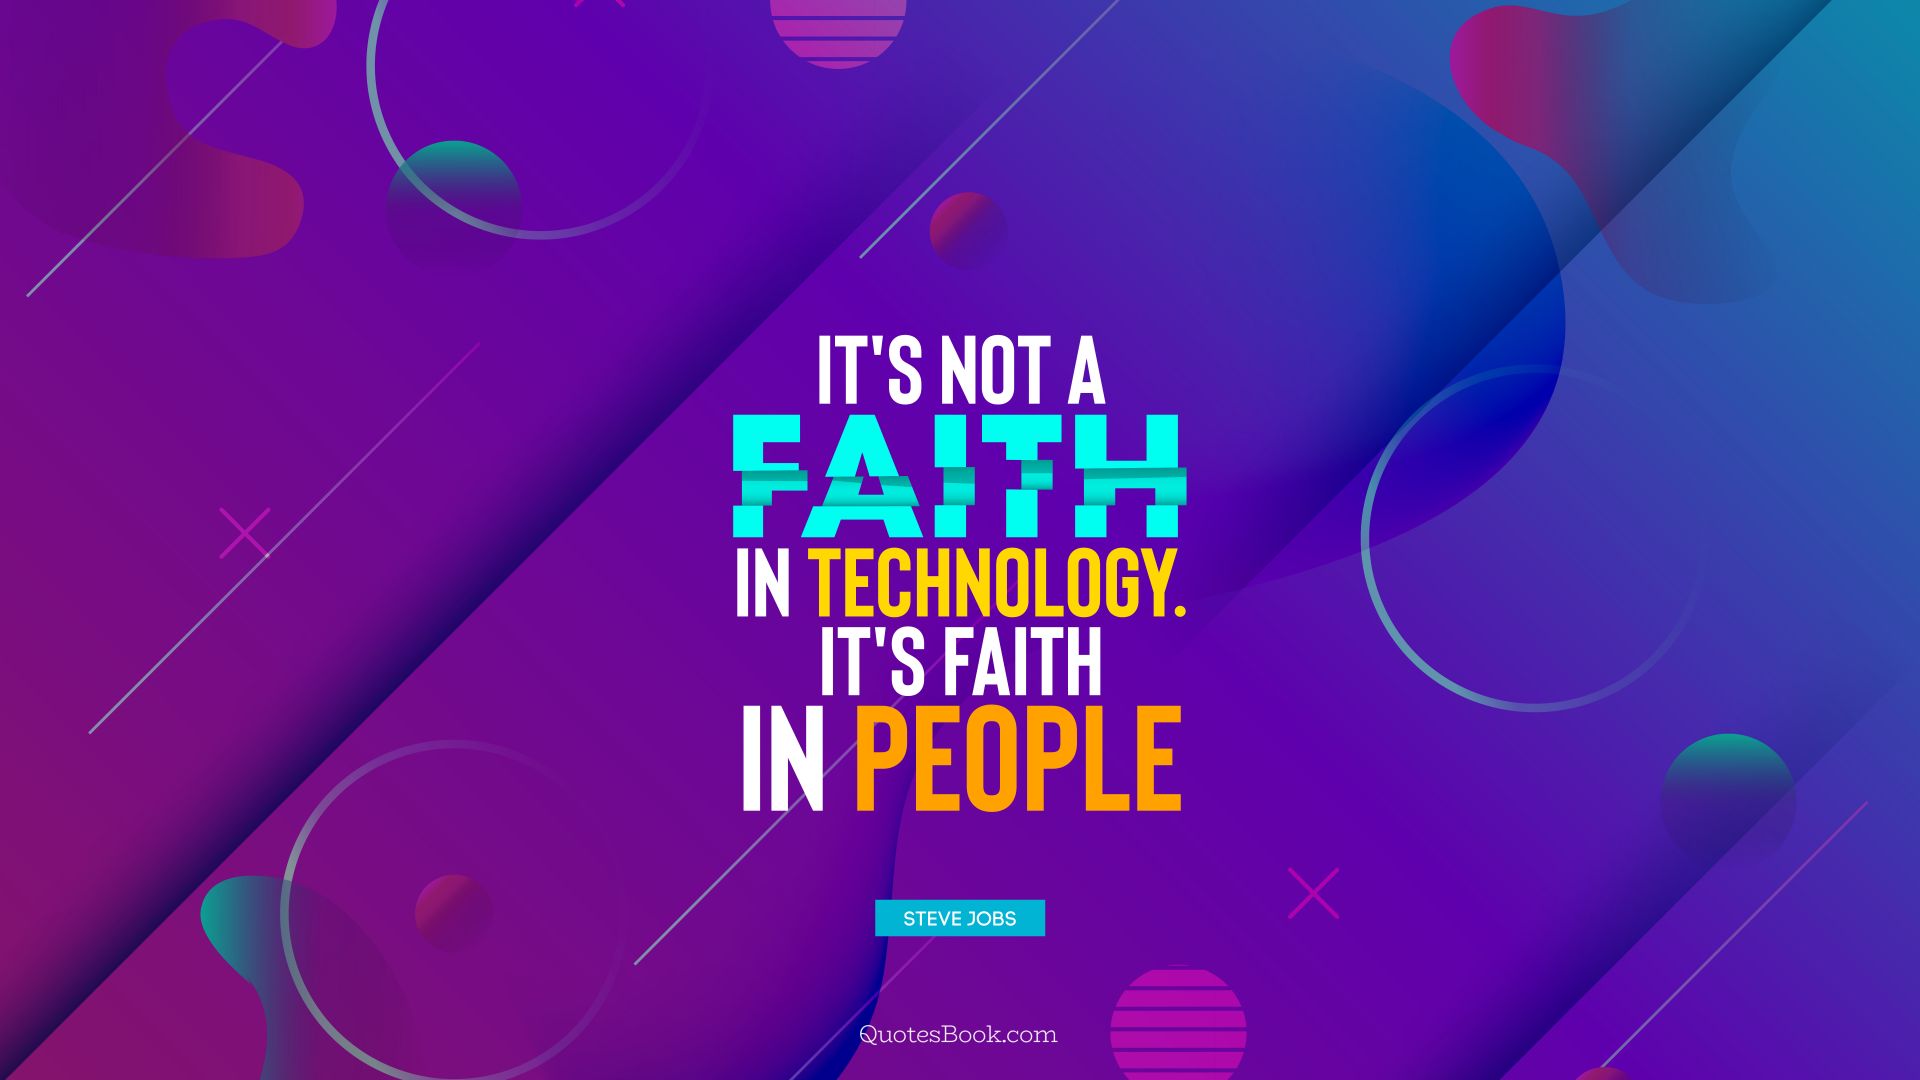 It's not a faith in technology. It's faith in people. - Quote by Steve Jobs